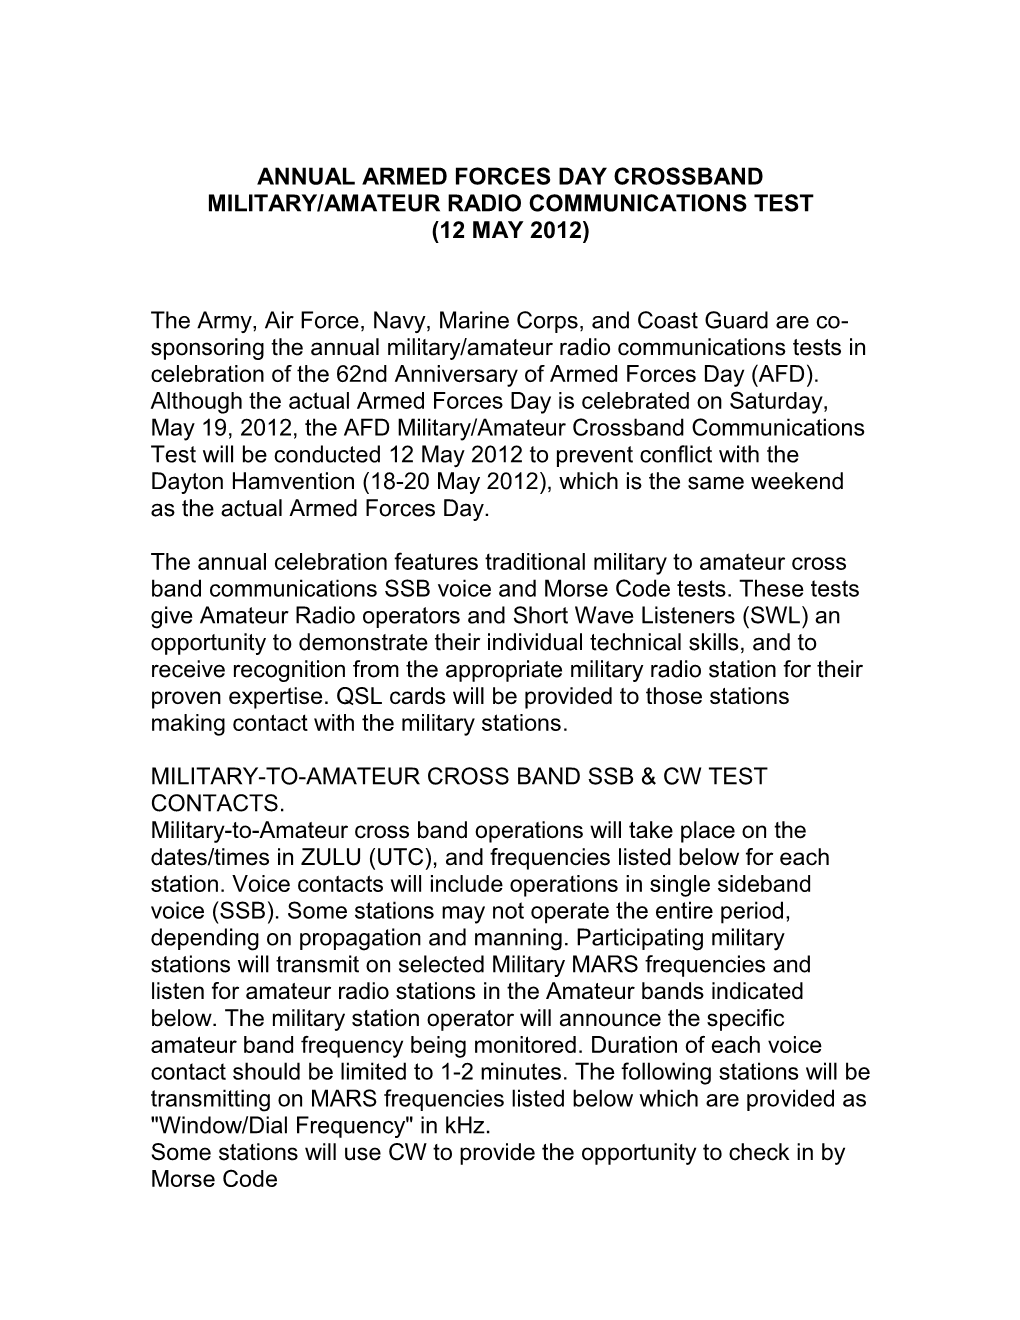 Annual Armed Forces Day Crossband Military/Amateur Radio Communications Test (12 May 2012)